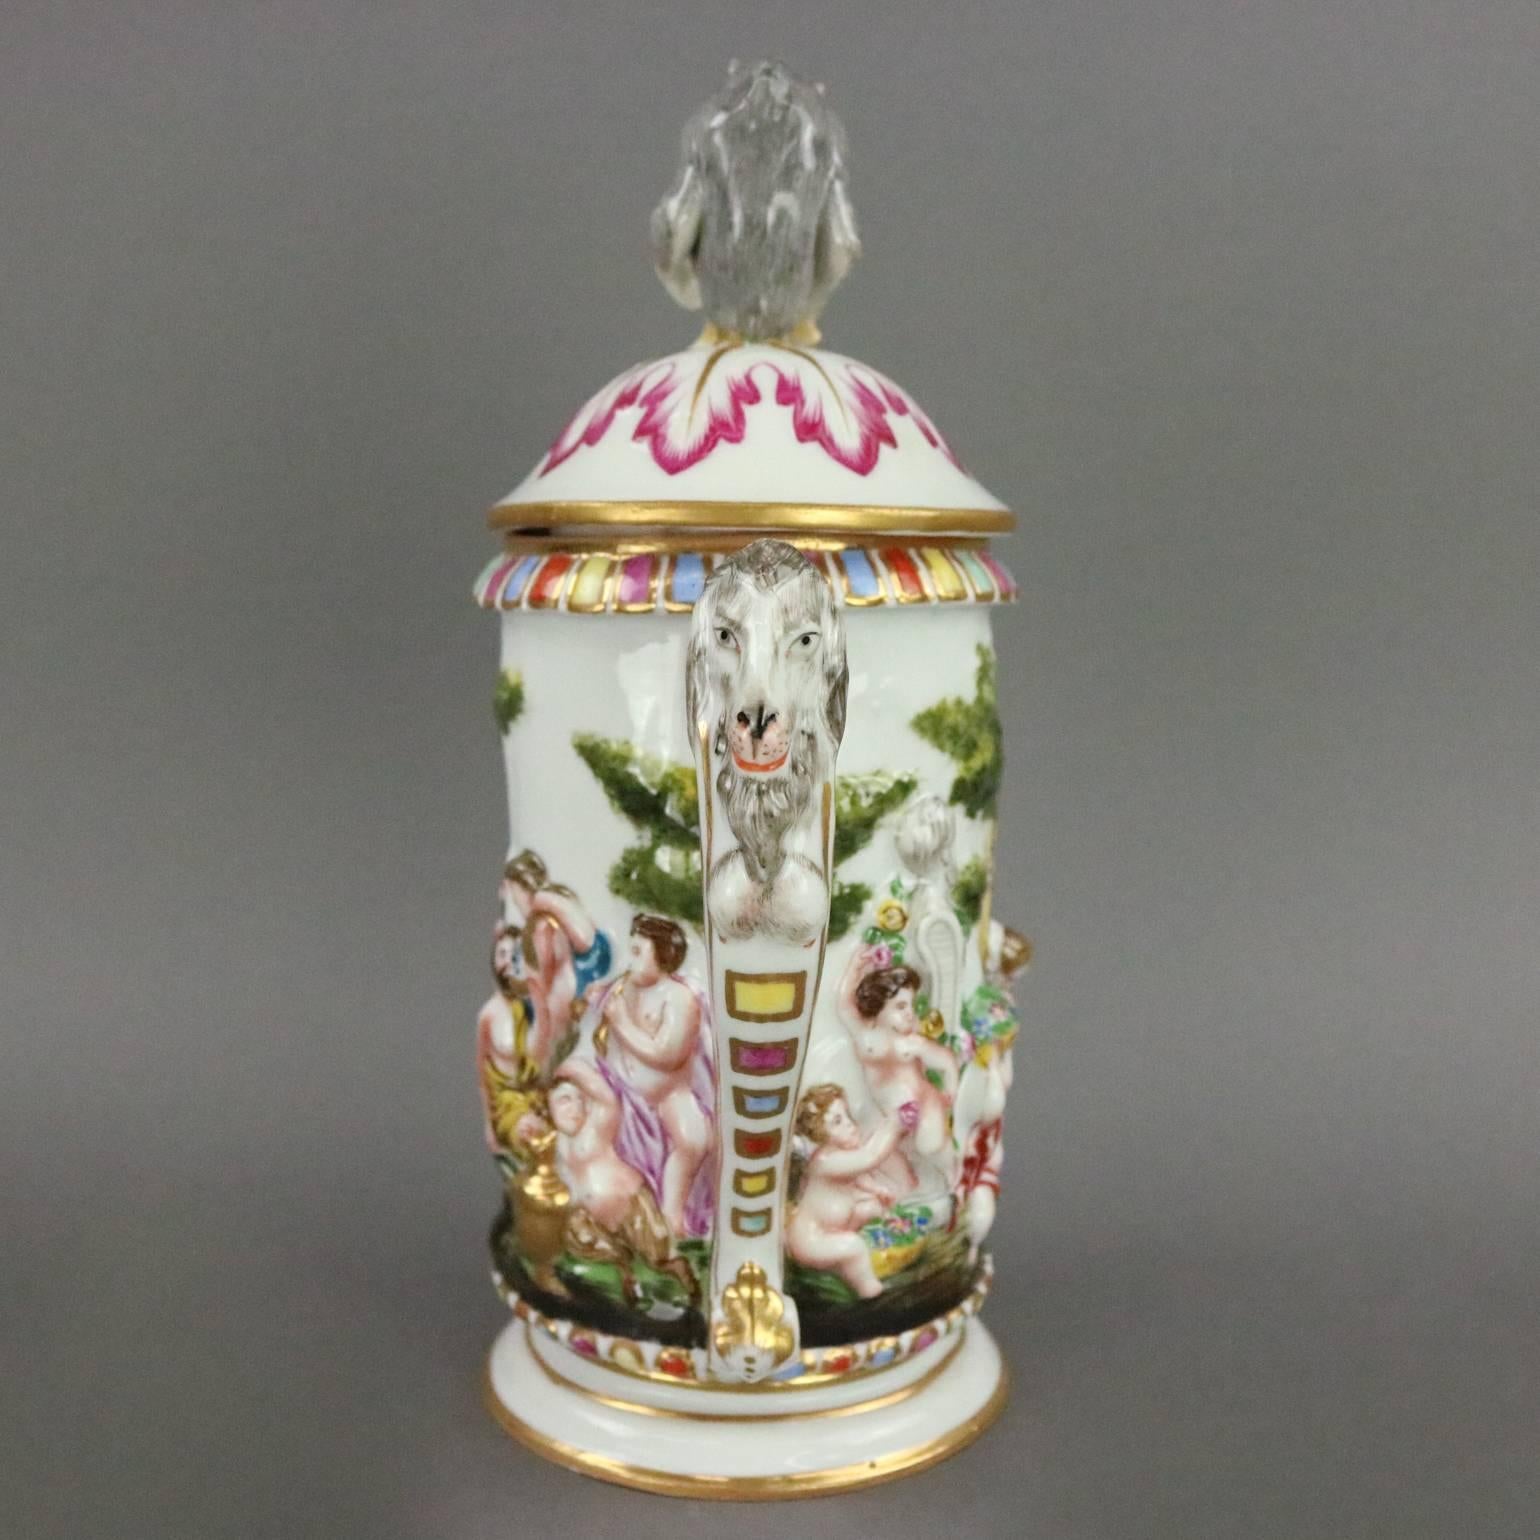 Antique Italian capodimonte lidded stein features high relief hand-painted and gilt scene depicting Roman celebration, figural monkey finial, and goat on handle, underglaze blue Crown N mark on base, circa 1890.

Measures: 9.5" H x 6" W